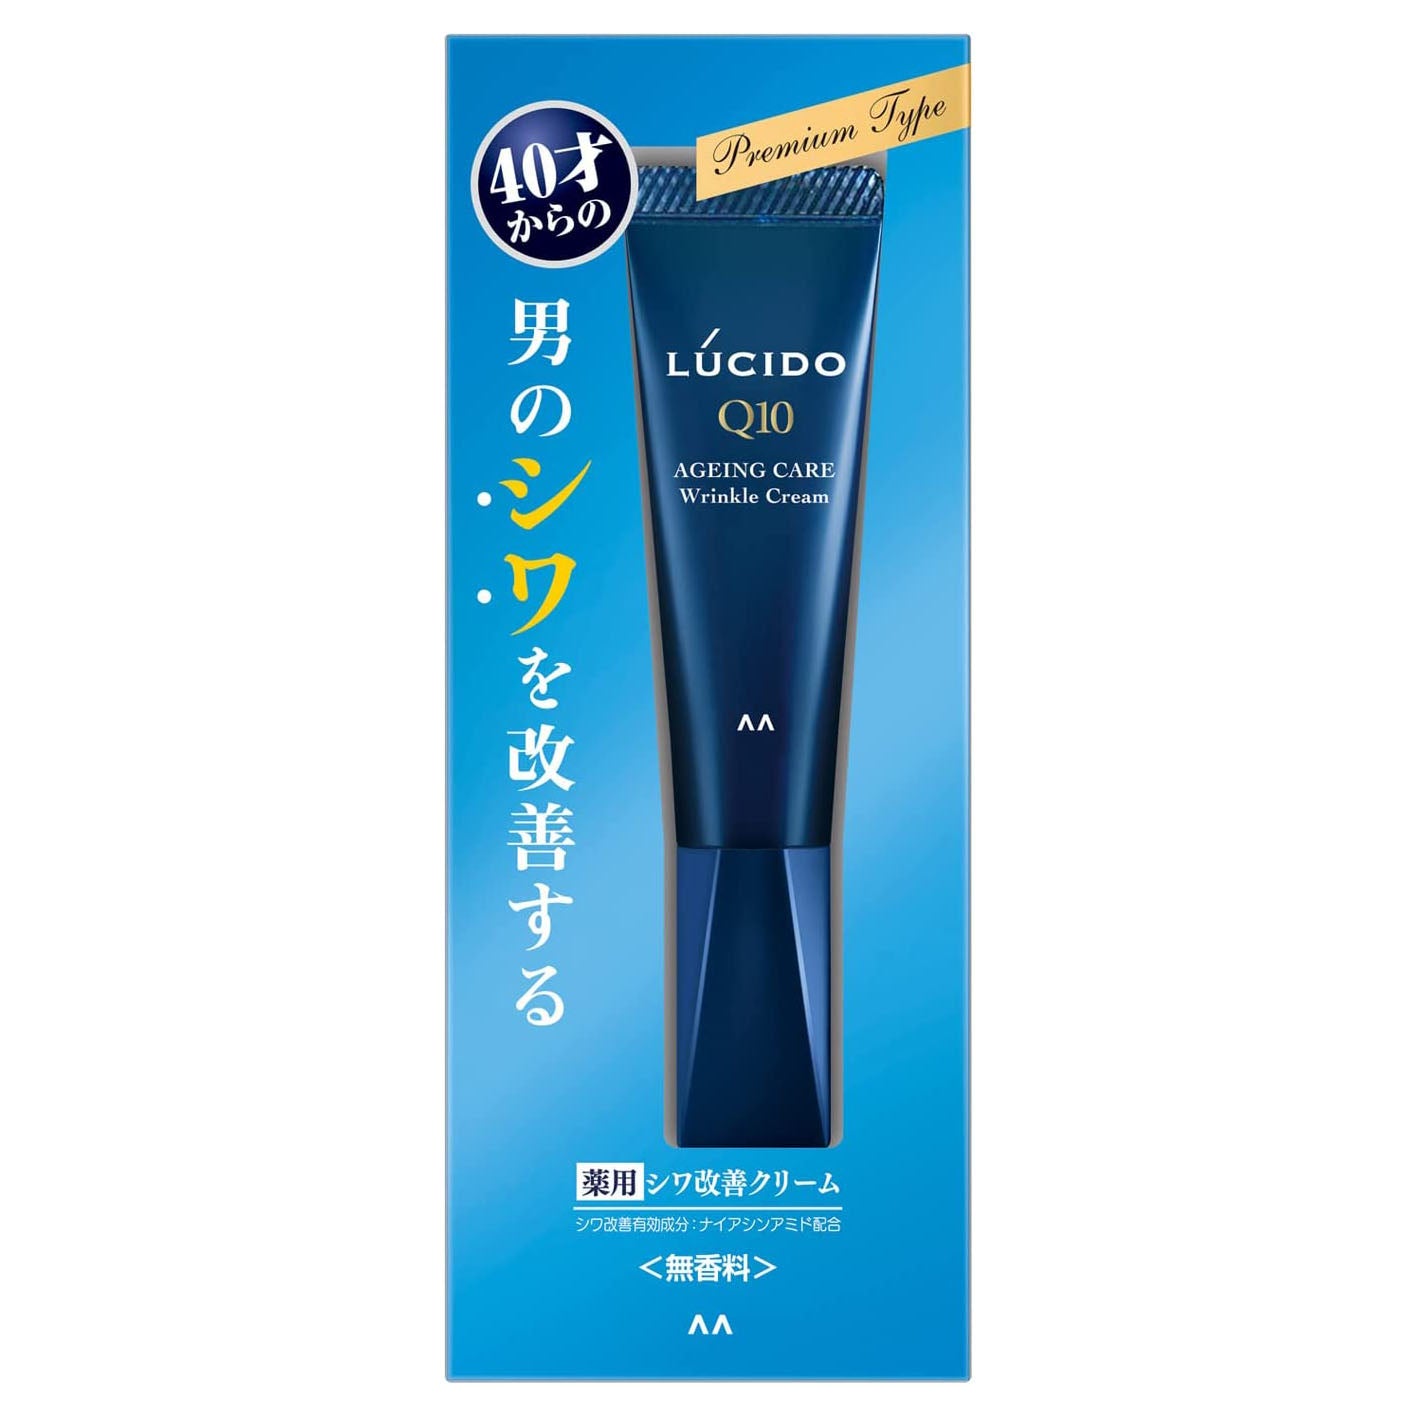 Lucido Medicated Wrinkle Force Cream 20g - Harajuku Culture Japan - Japanease Products Store Beauty and Stationery